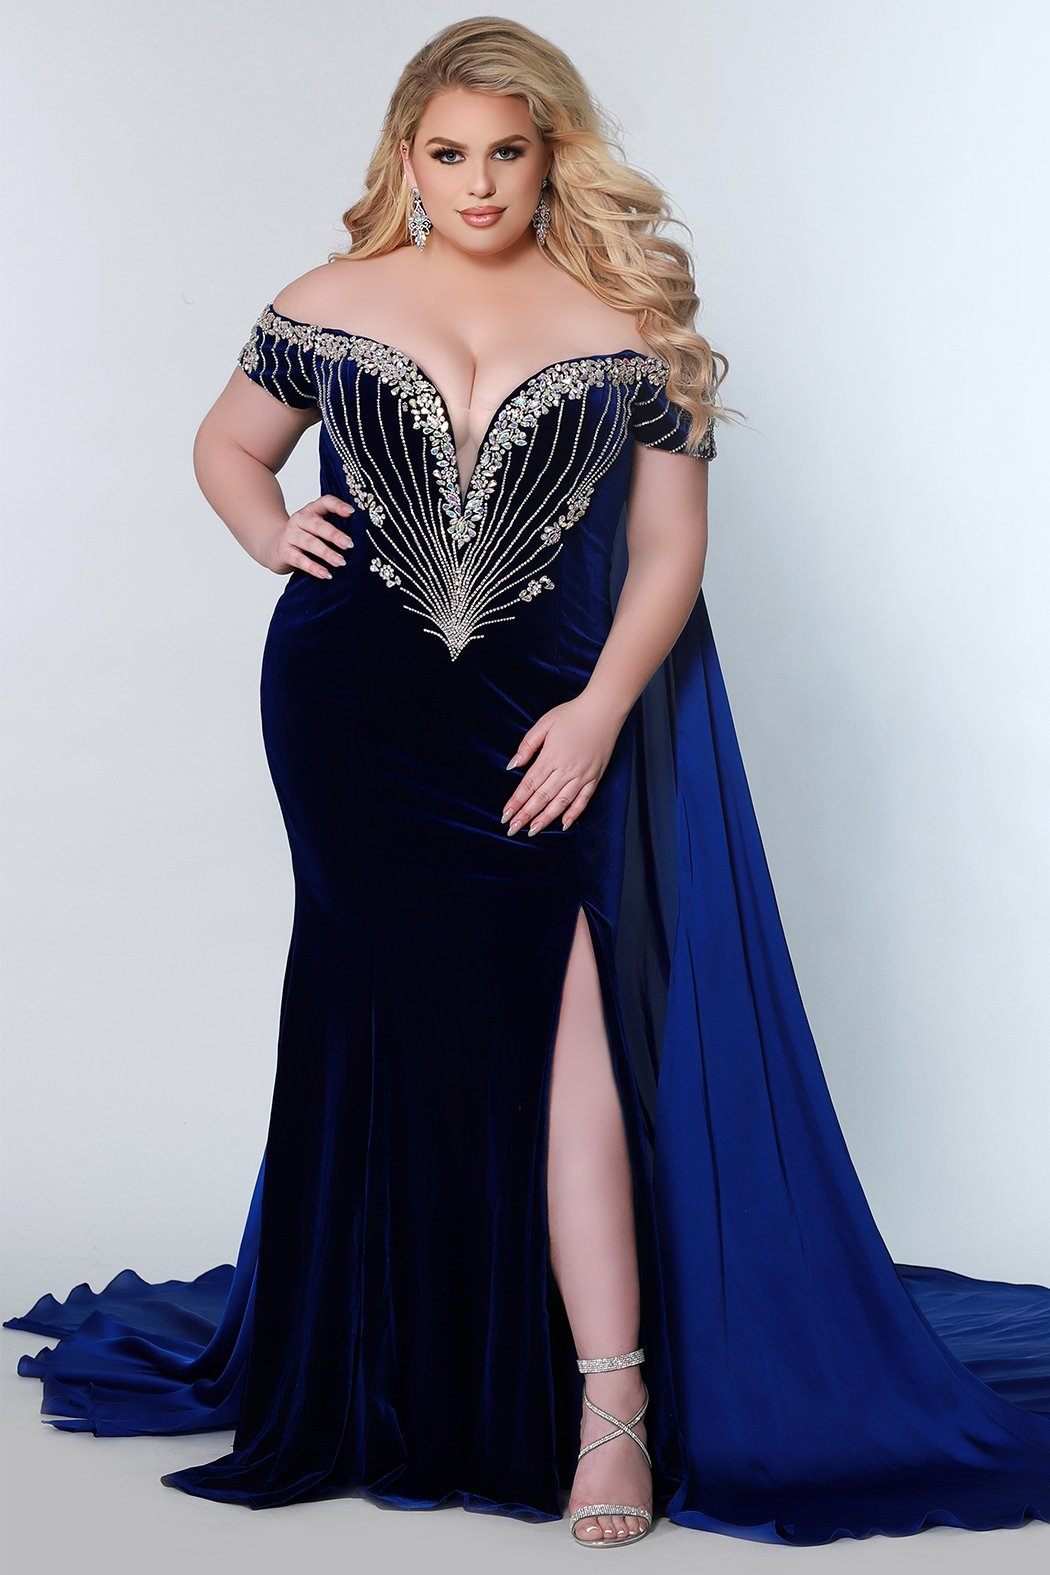 5 Winter Events to Wear an Evening Gown | Elegancia Formal Wear